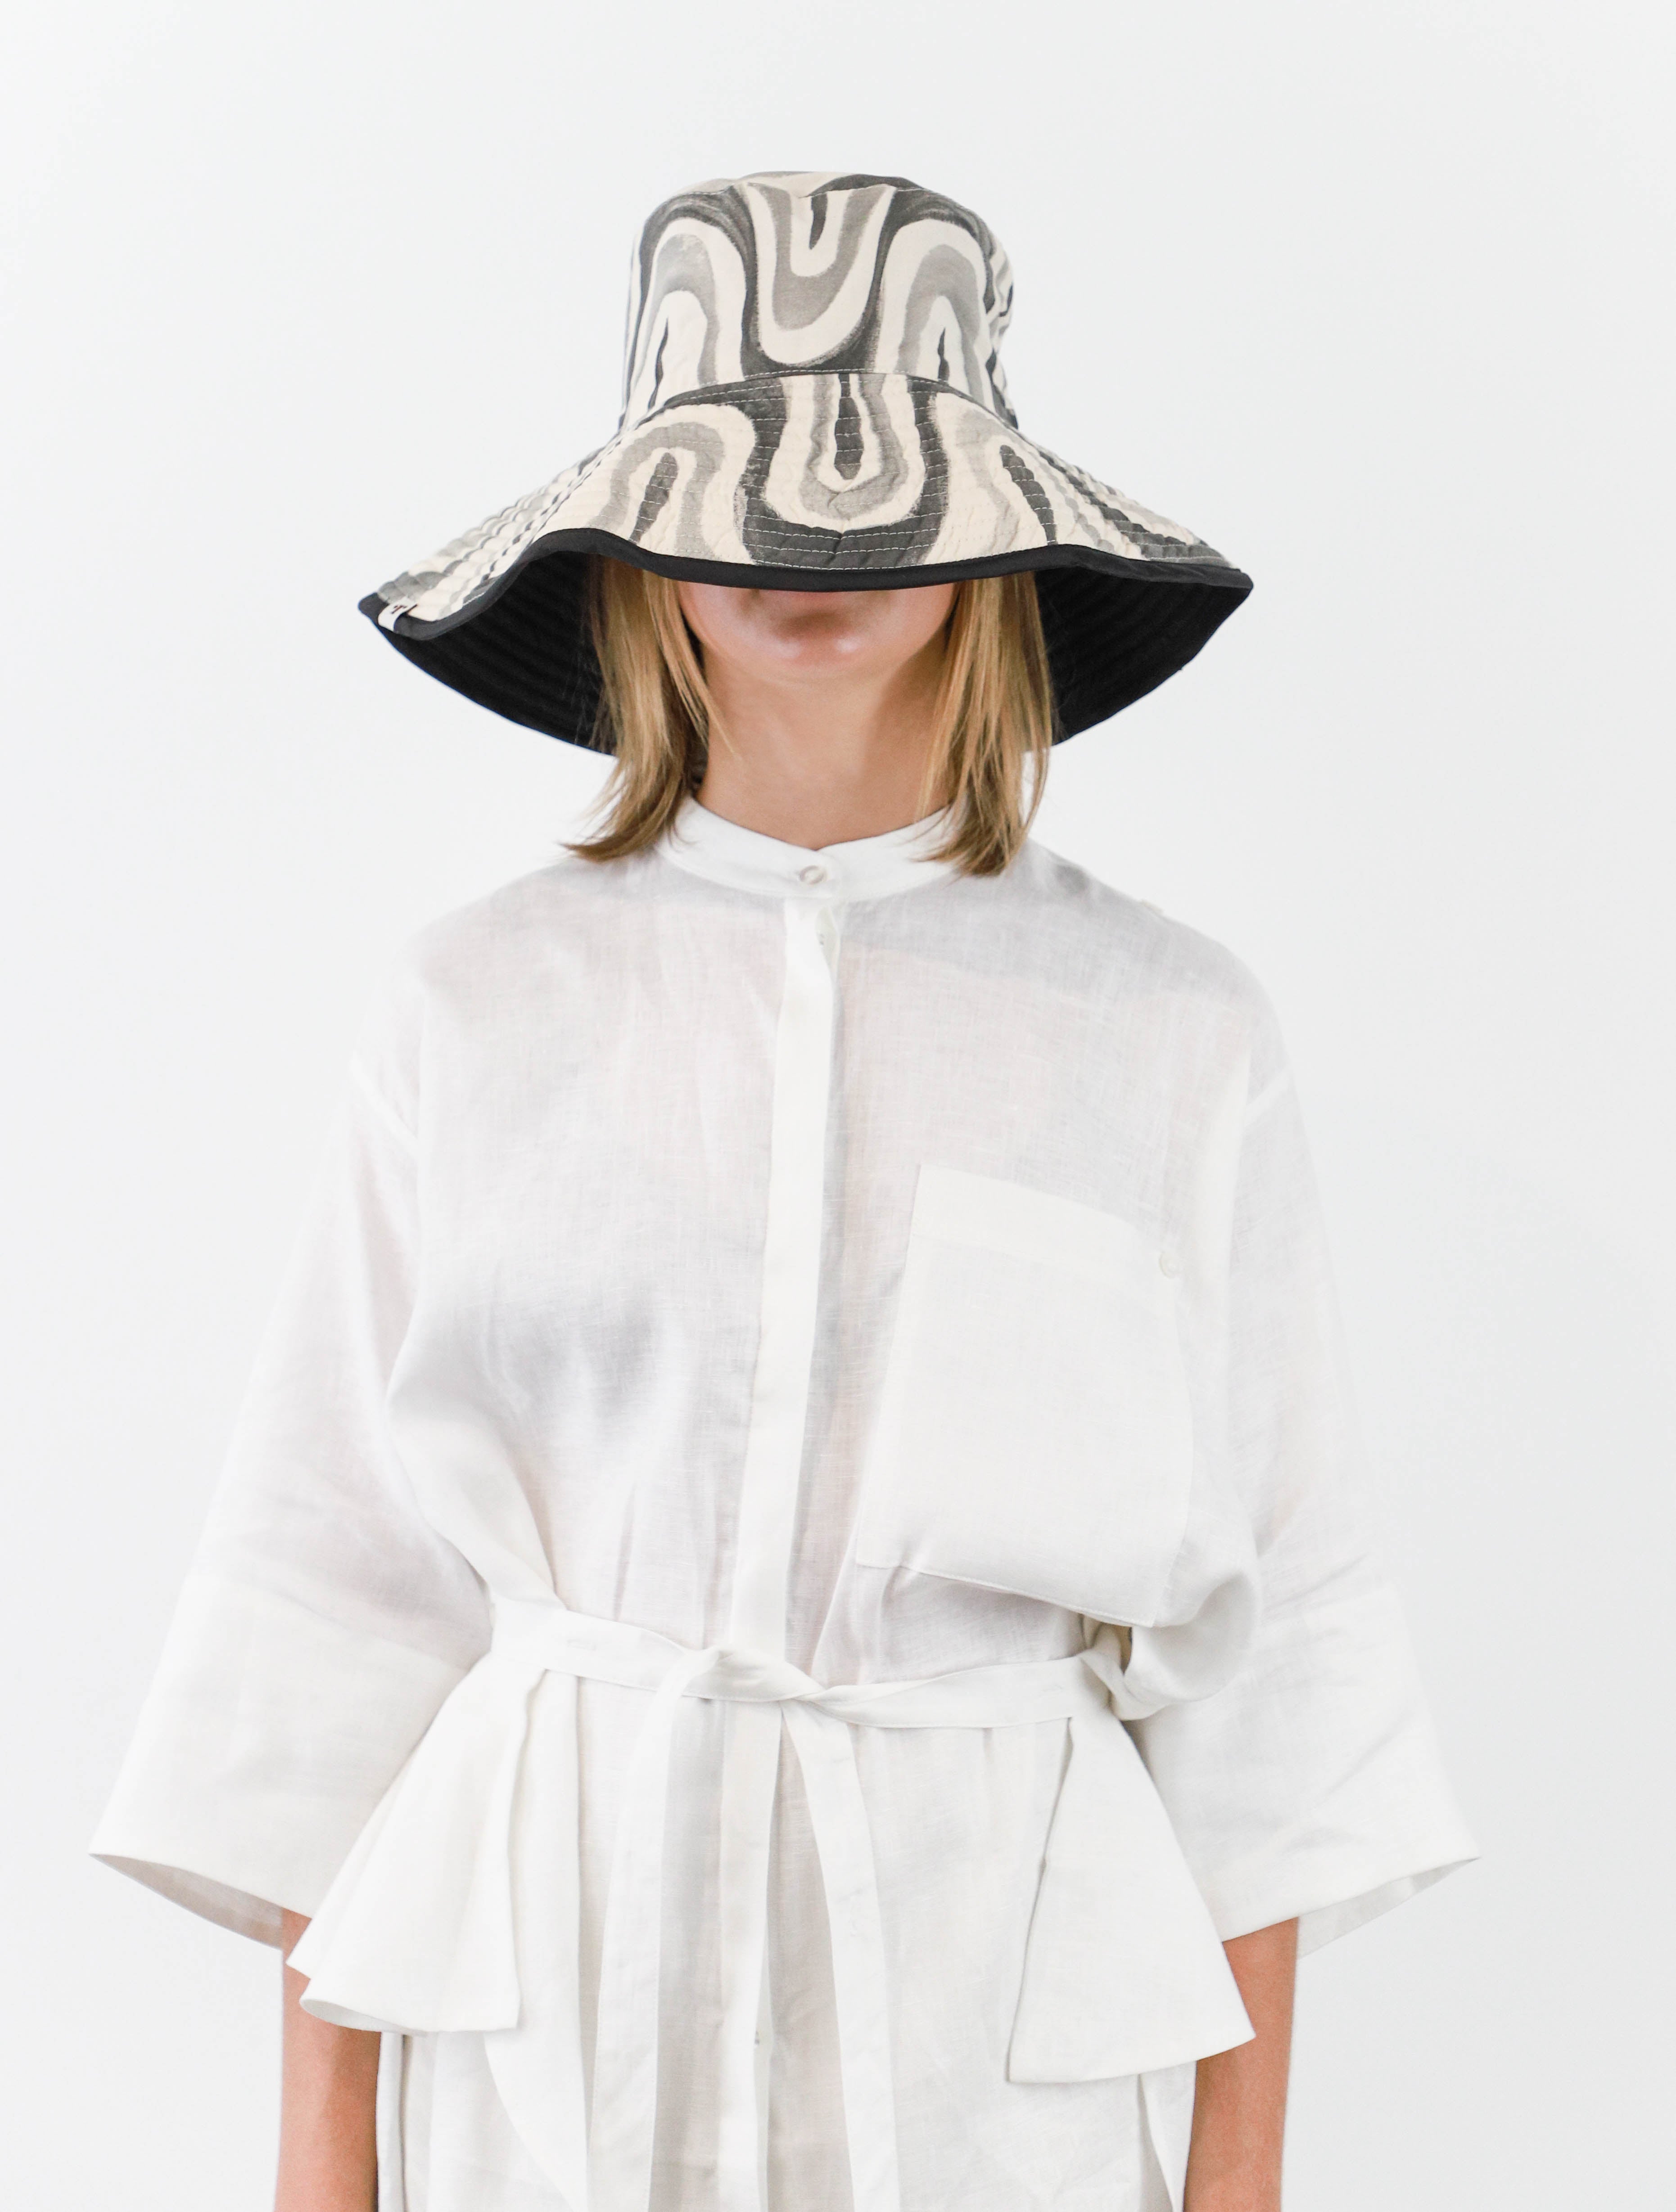 Romualda Roca bucket hat with black and white swirl pattern and black lining shown on model with brim folded up